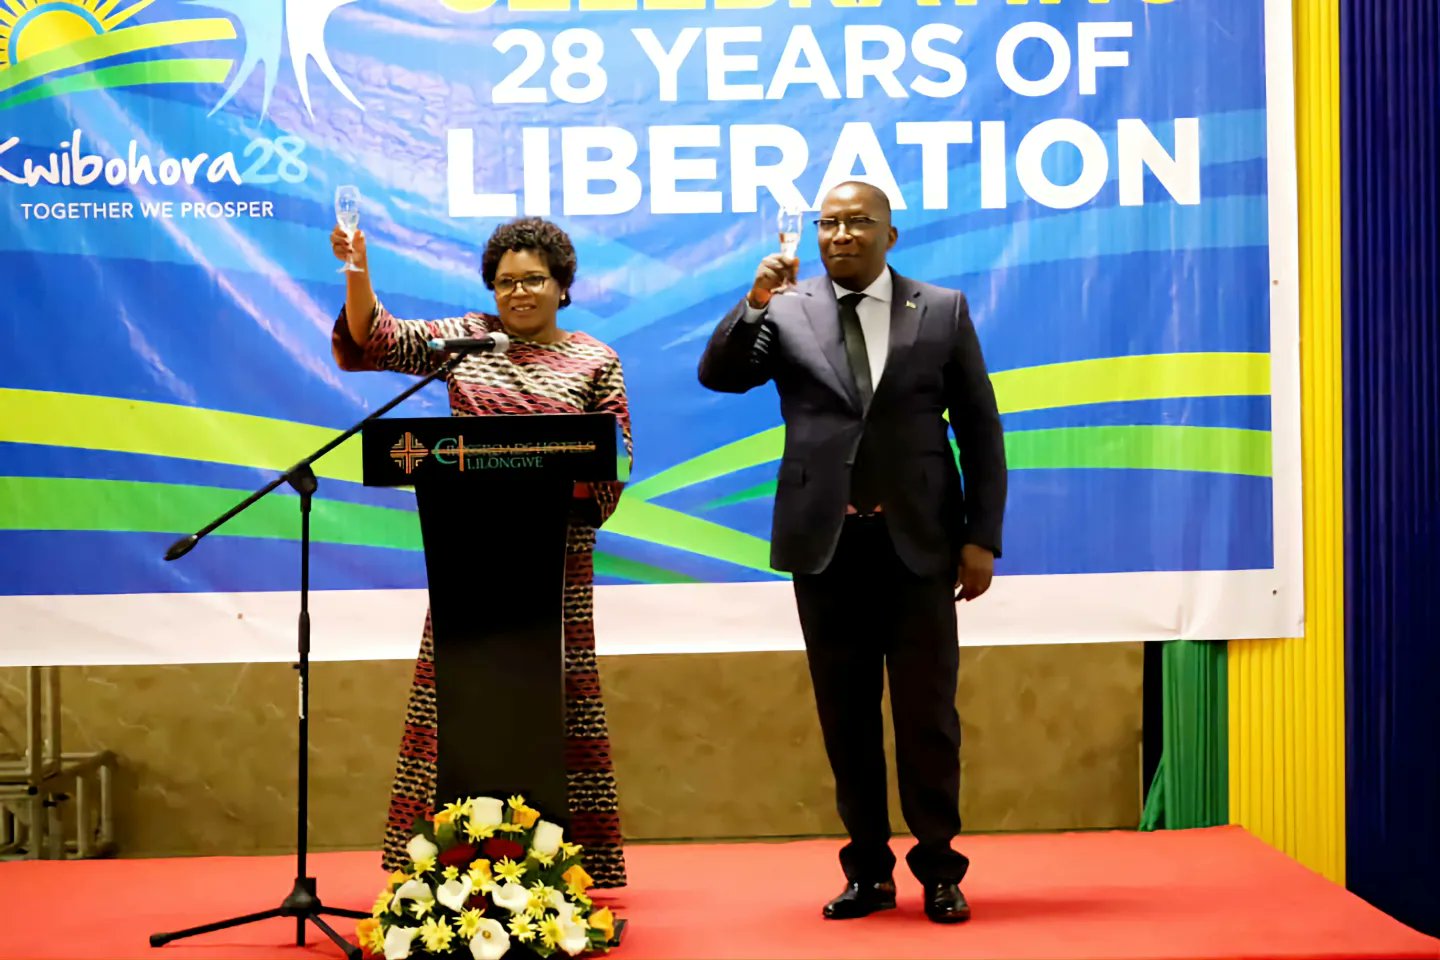 Nancy Tembo, Malawi's Minister of Foreign Affairs, and Amandin Rugira, Rwanda's High Commissioner to Malawi, in Lilongwe, Malawi, during celebrations of Rwandau2019s independence and liberation anniversaries, held on Friday, July 29.